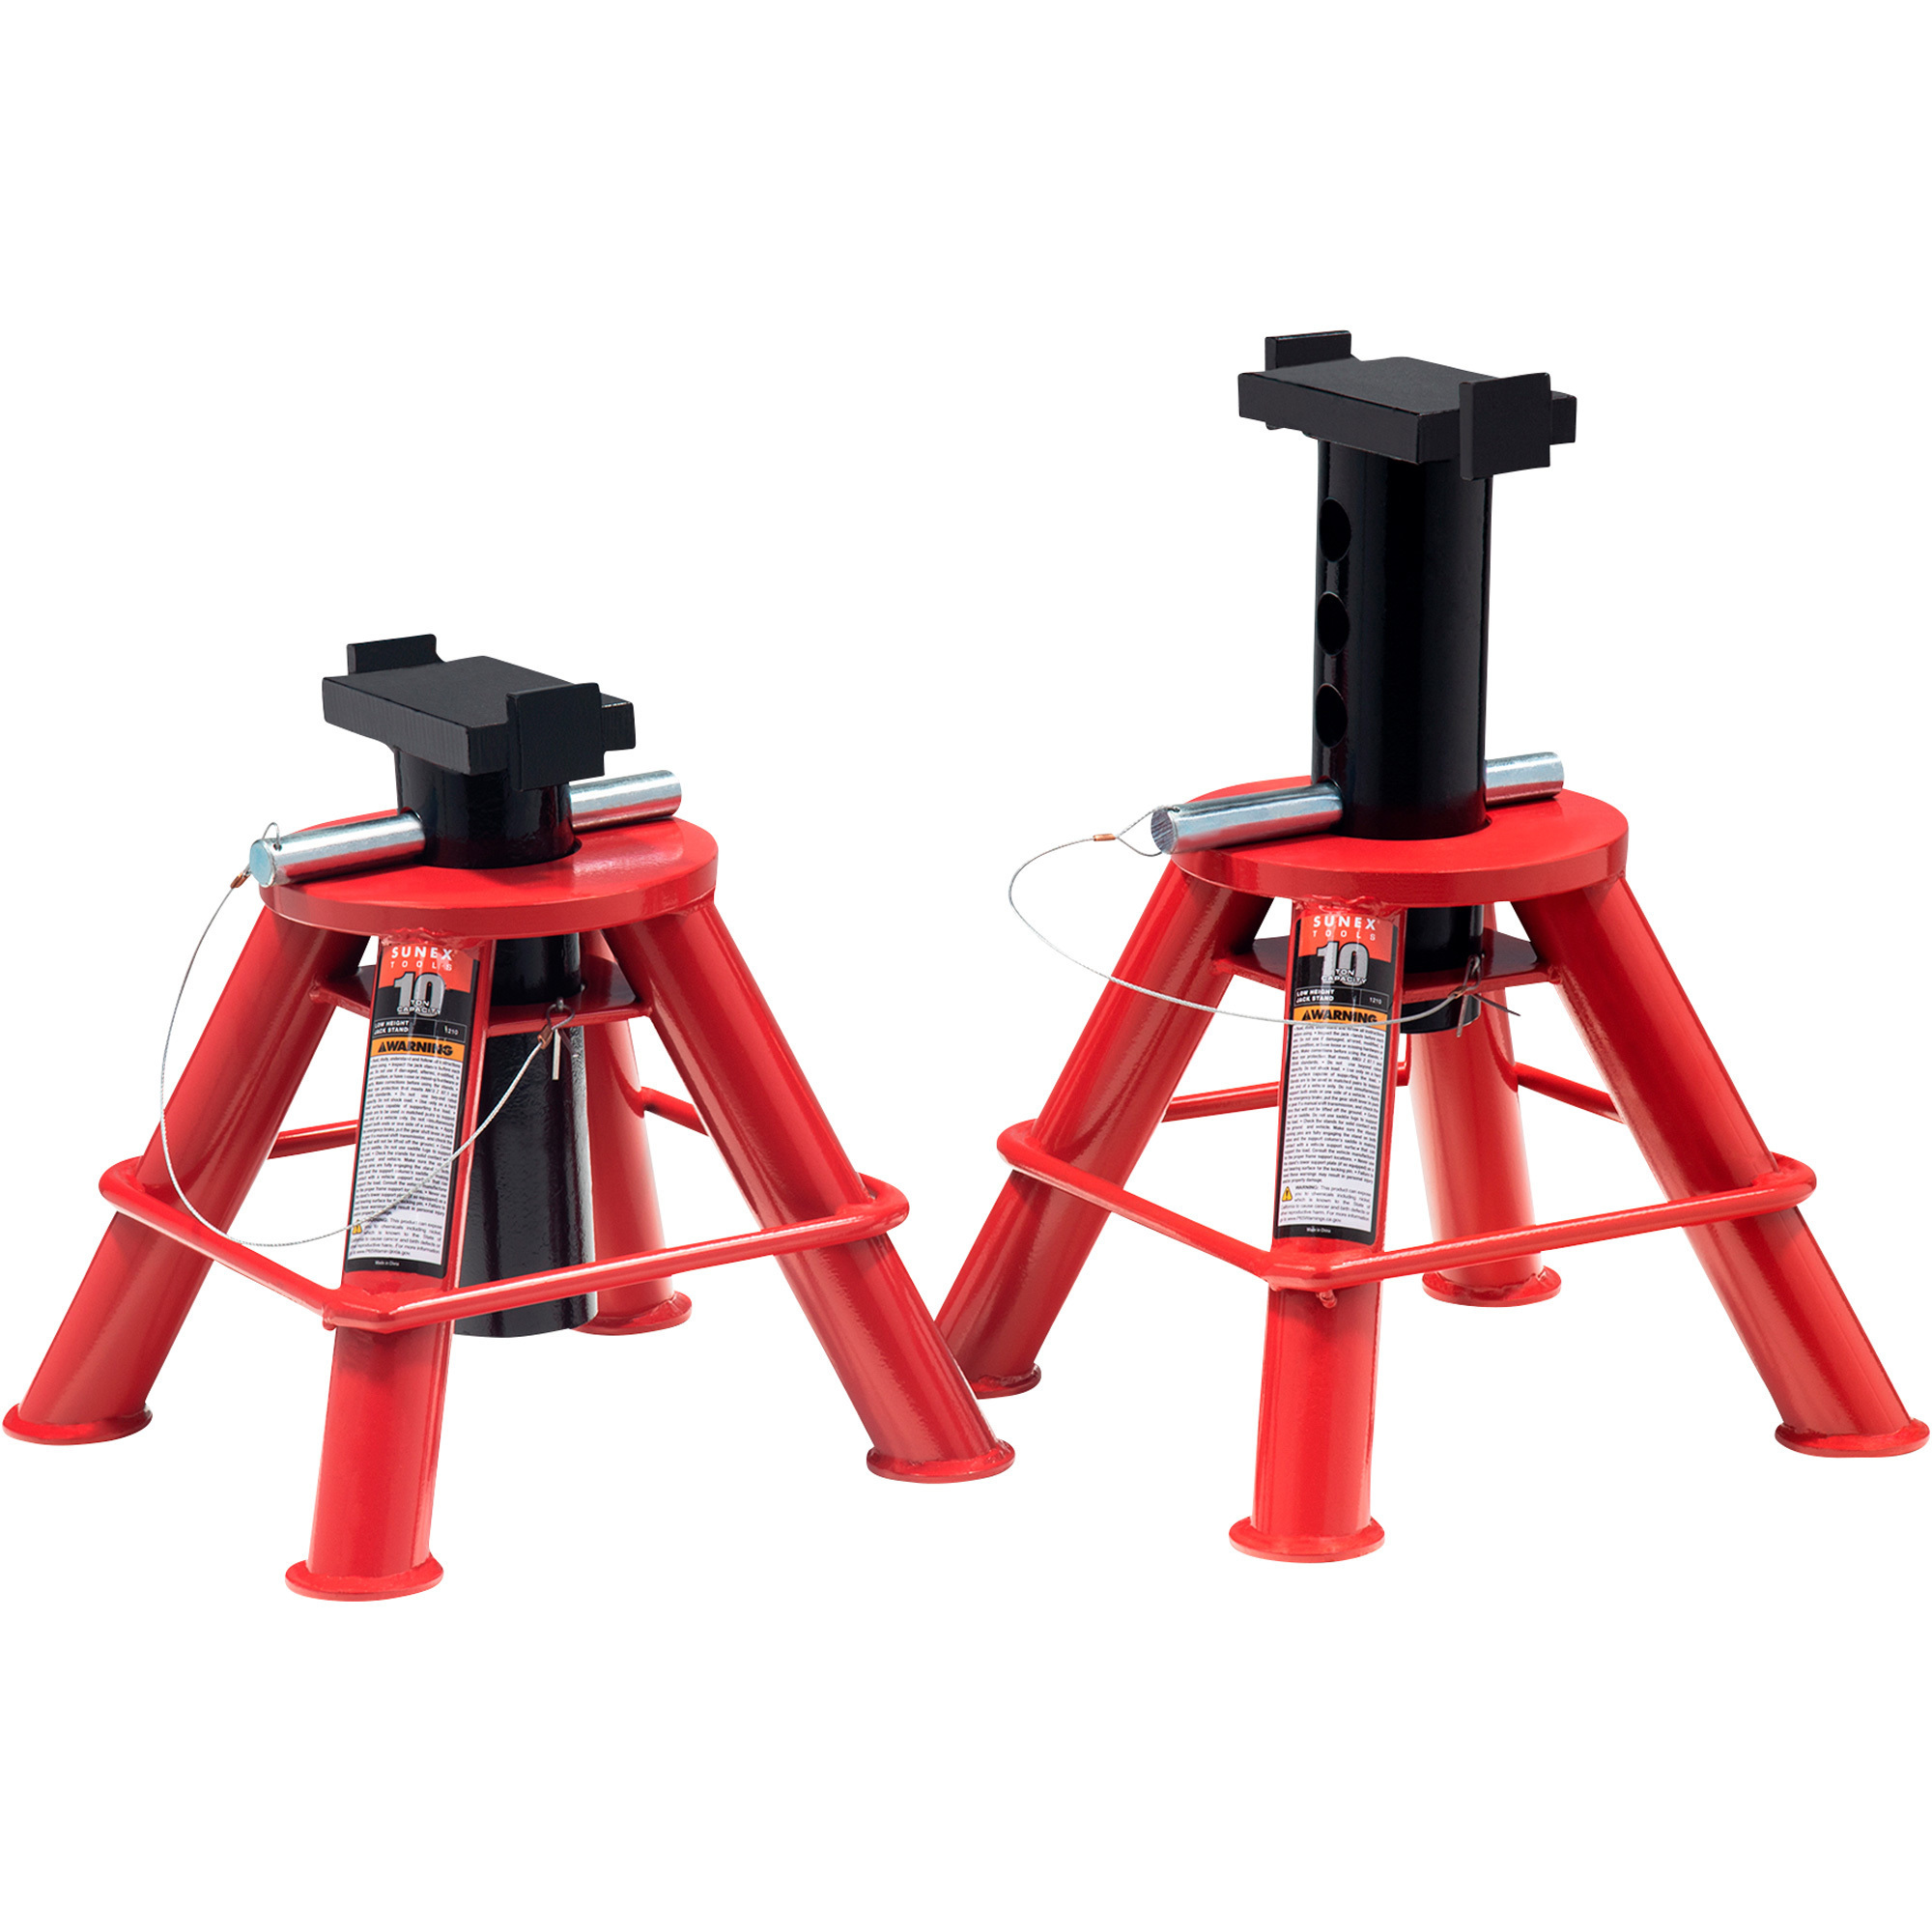 Sunex Low-Height 10-Ton Jack Stands, Model# 1210